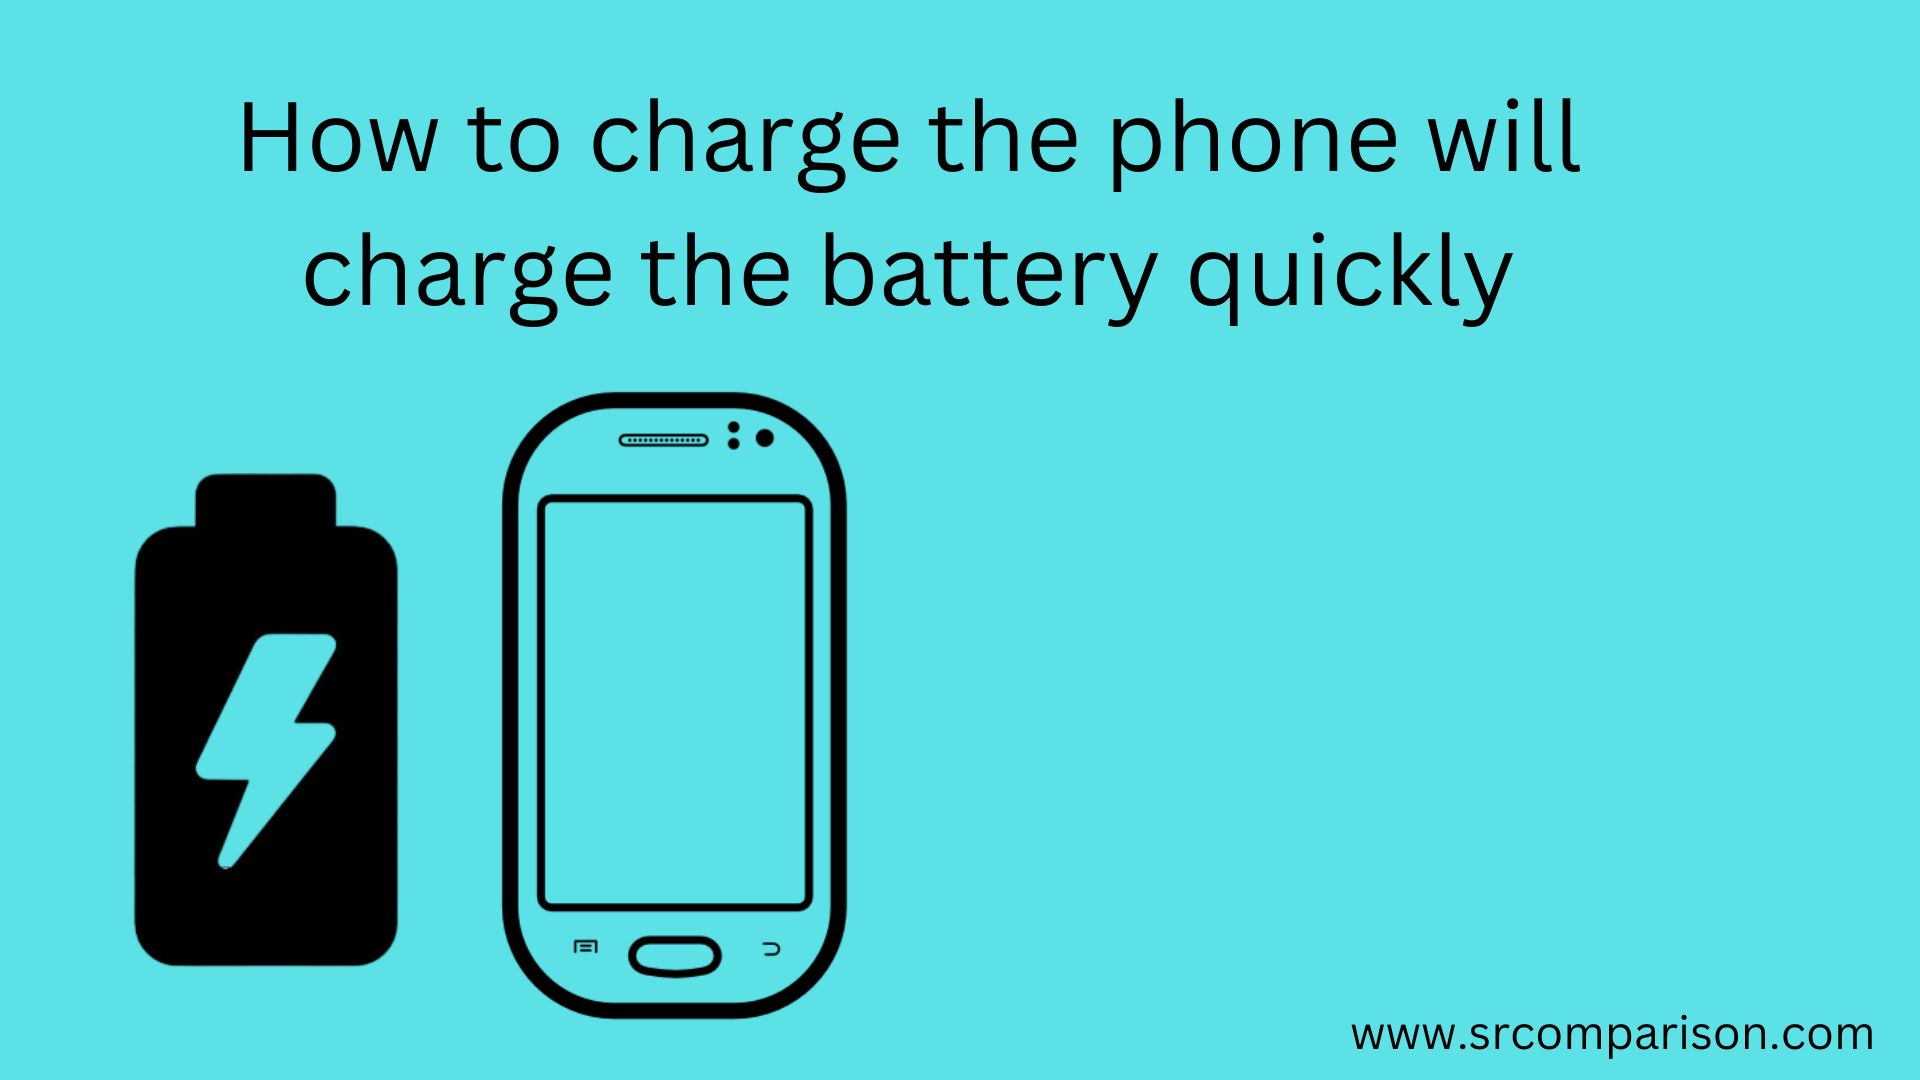 8 tips and tricks to save your phone battery